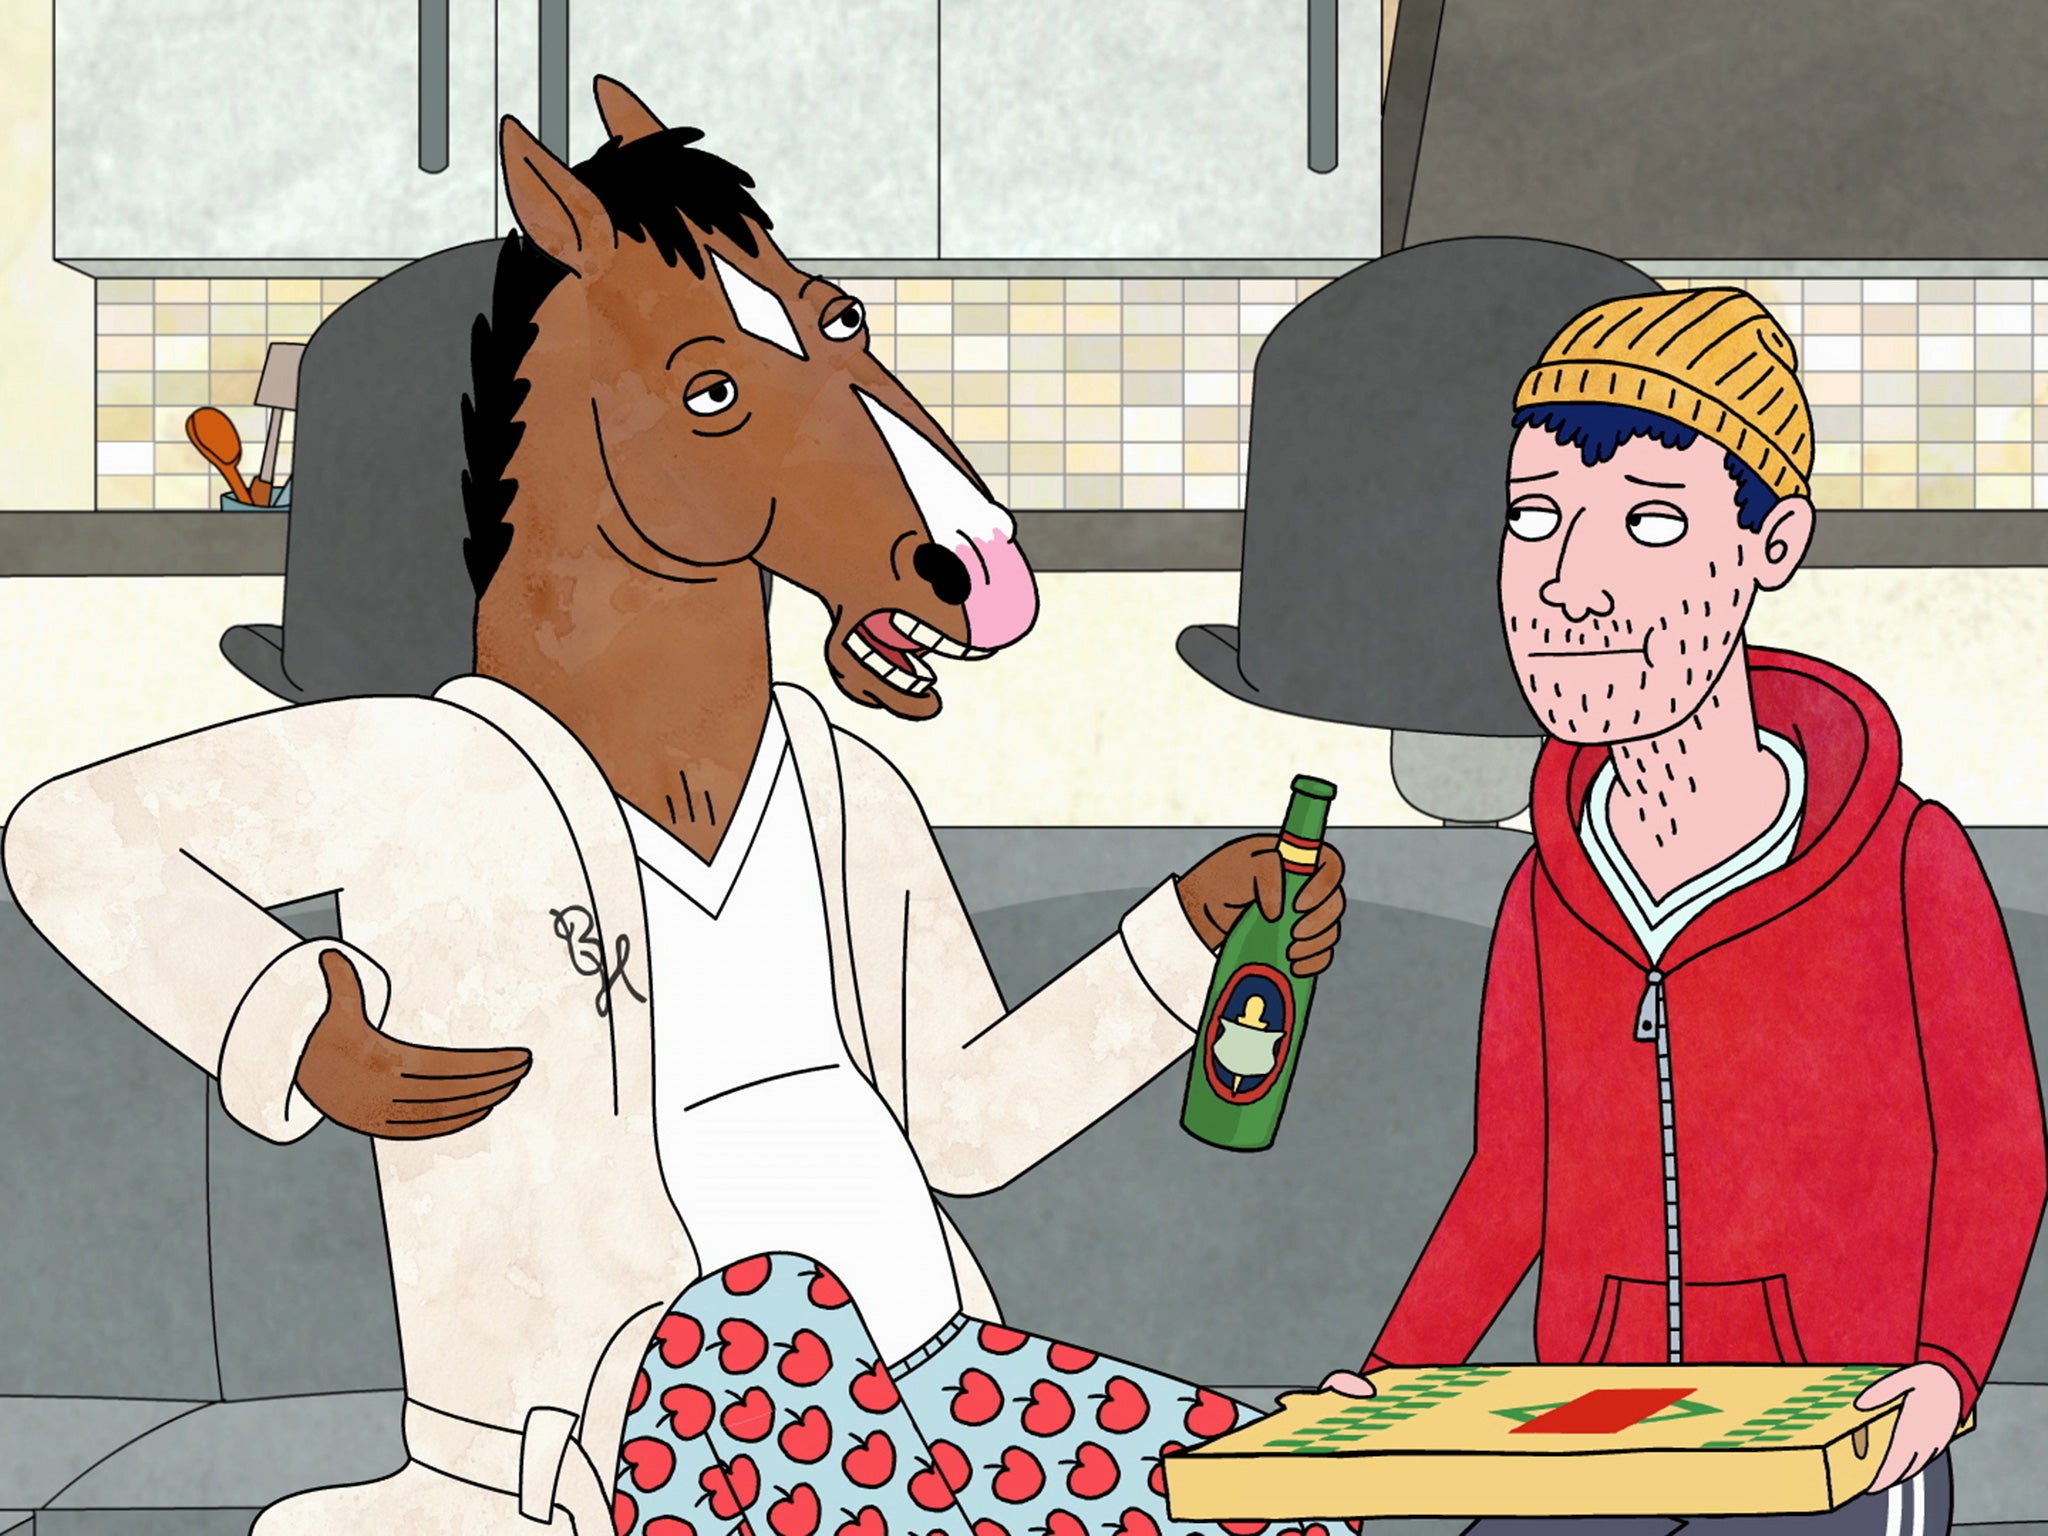 BoJack is the walking embodiment of why-the-long-face